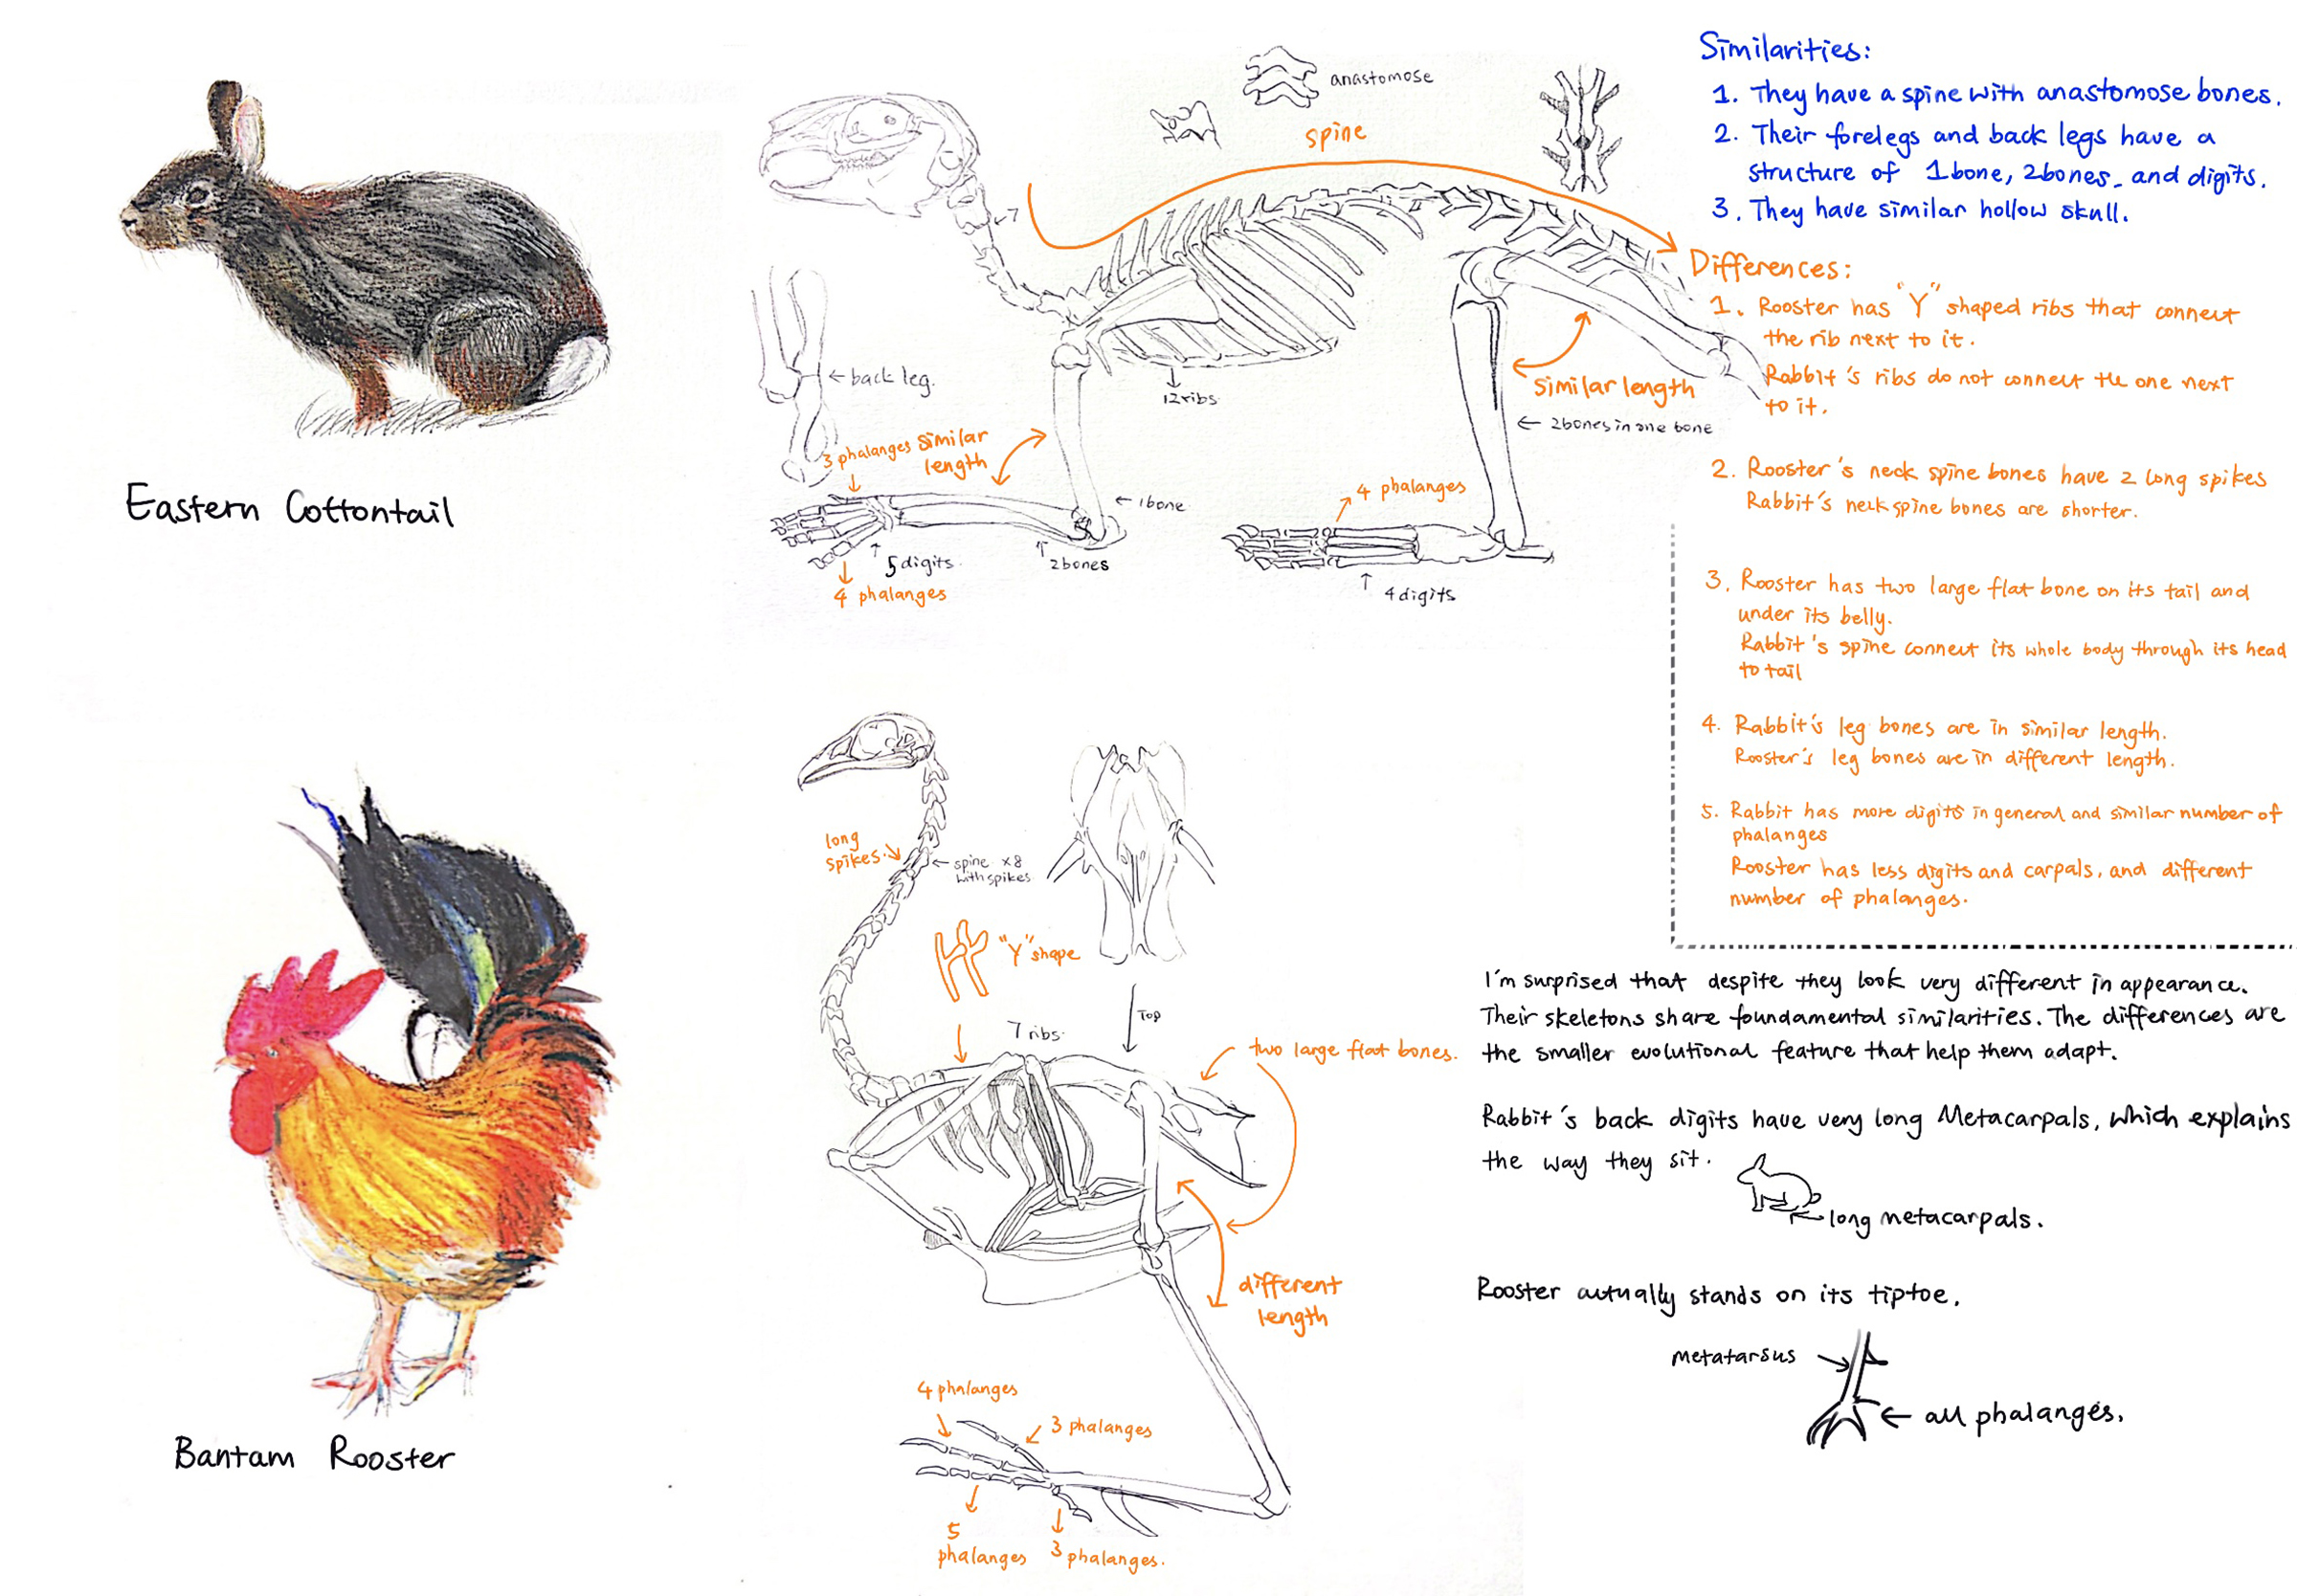 page from a student sketchbook comparing the eastern cottontail to the bantam rooster